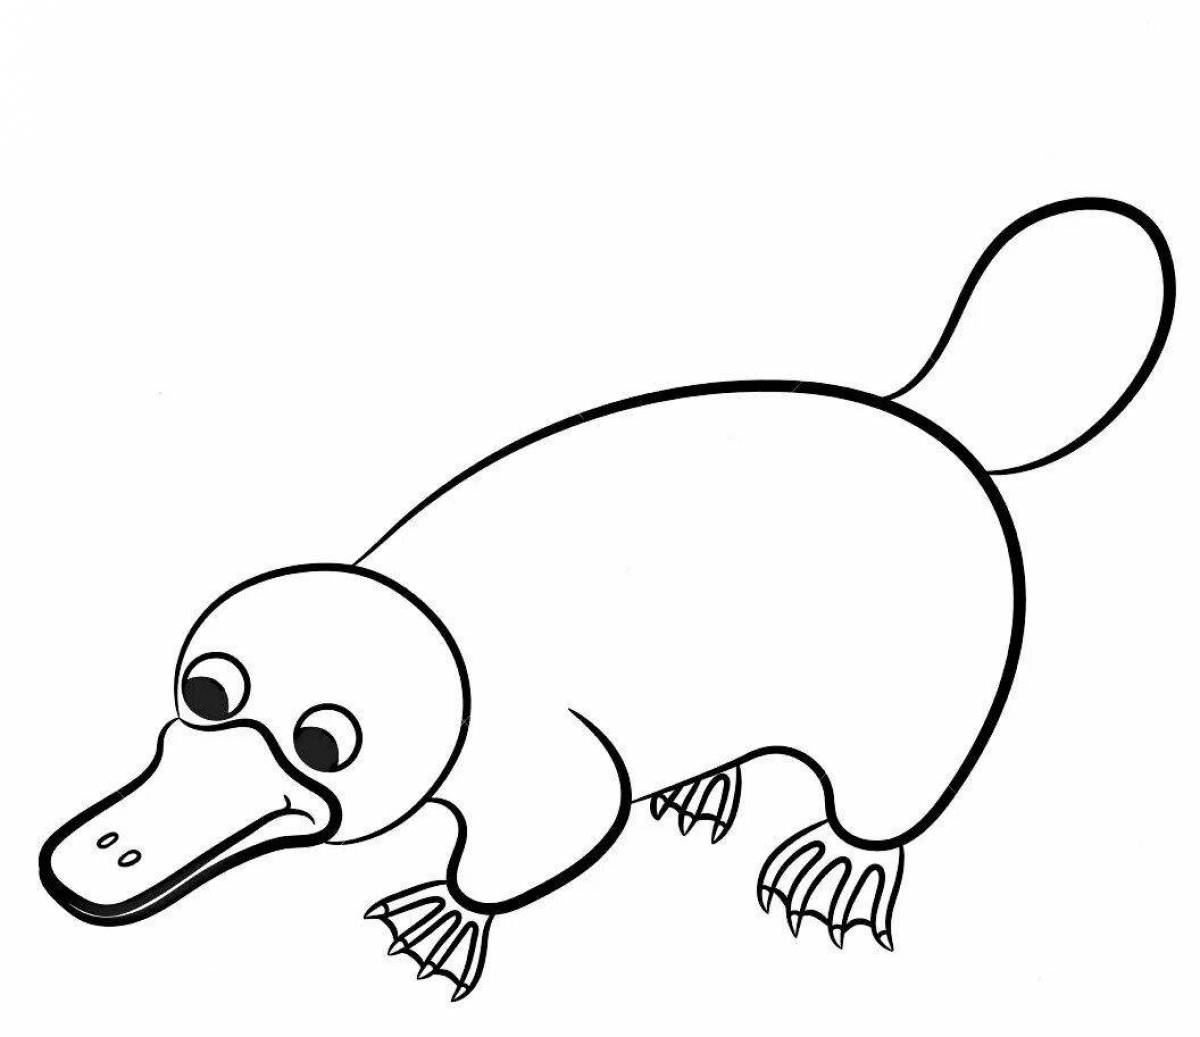 Platypus for kids #1